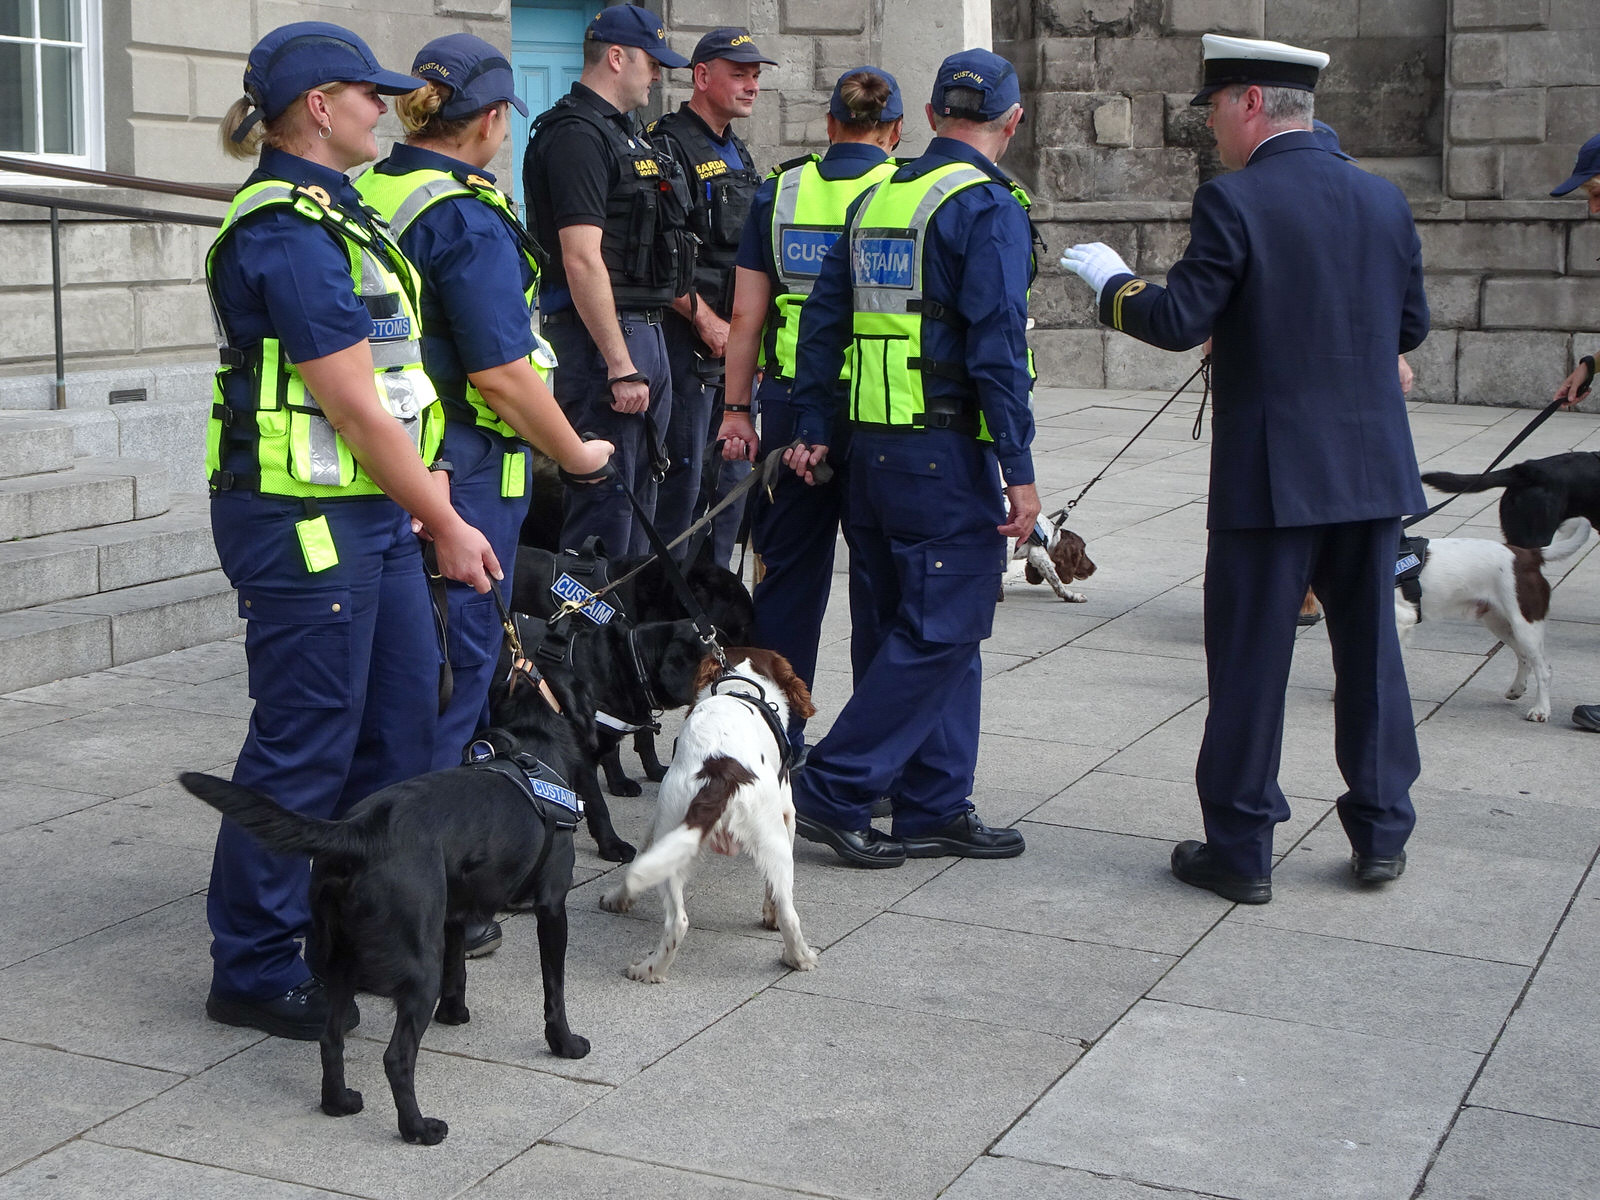 THE DOGS WHO WORK FOR THE IRISH CUSTOMS SERVICE [INVITED THE PRESS TO A PHOTO-SHOOT]
 008